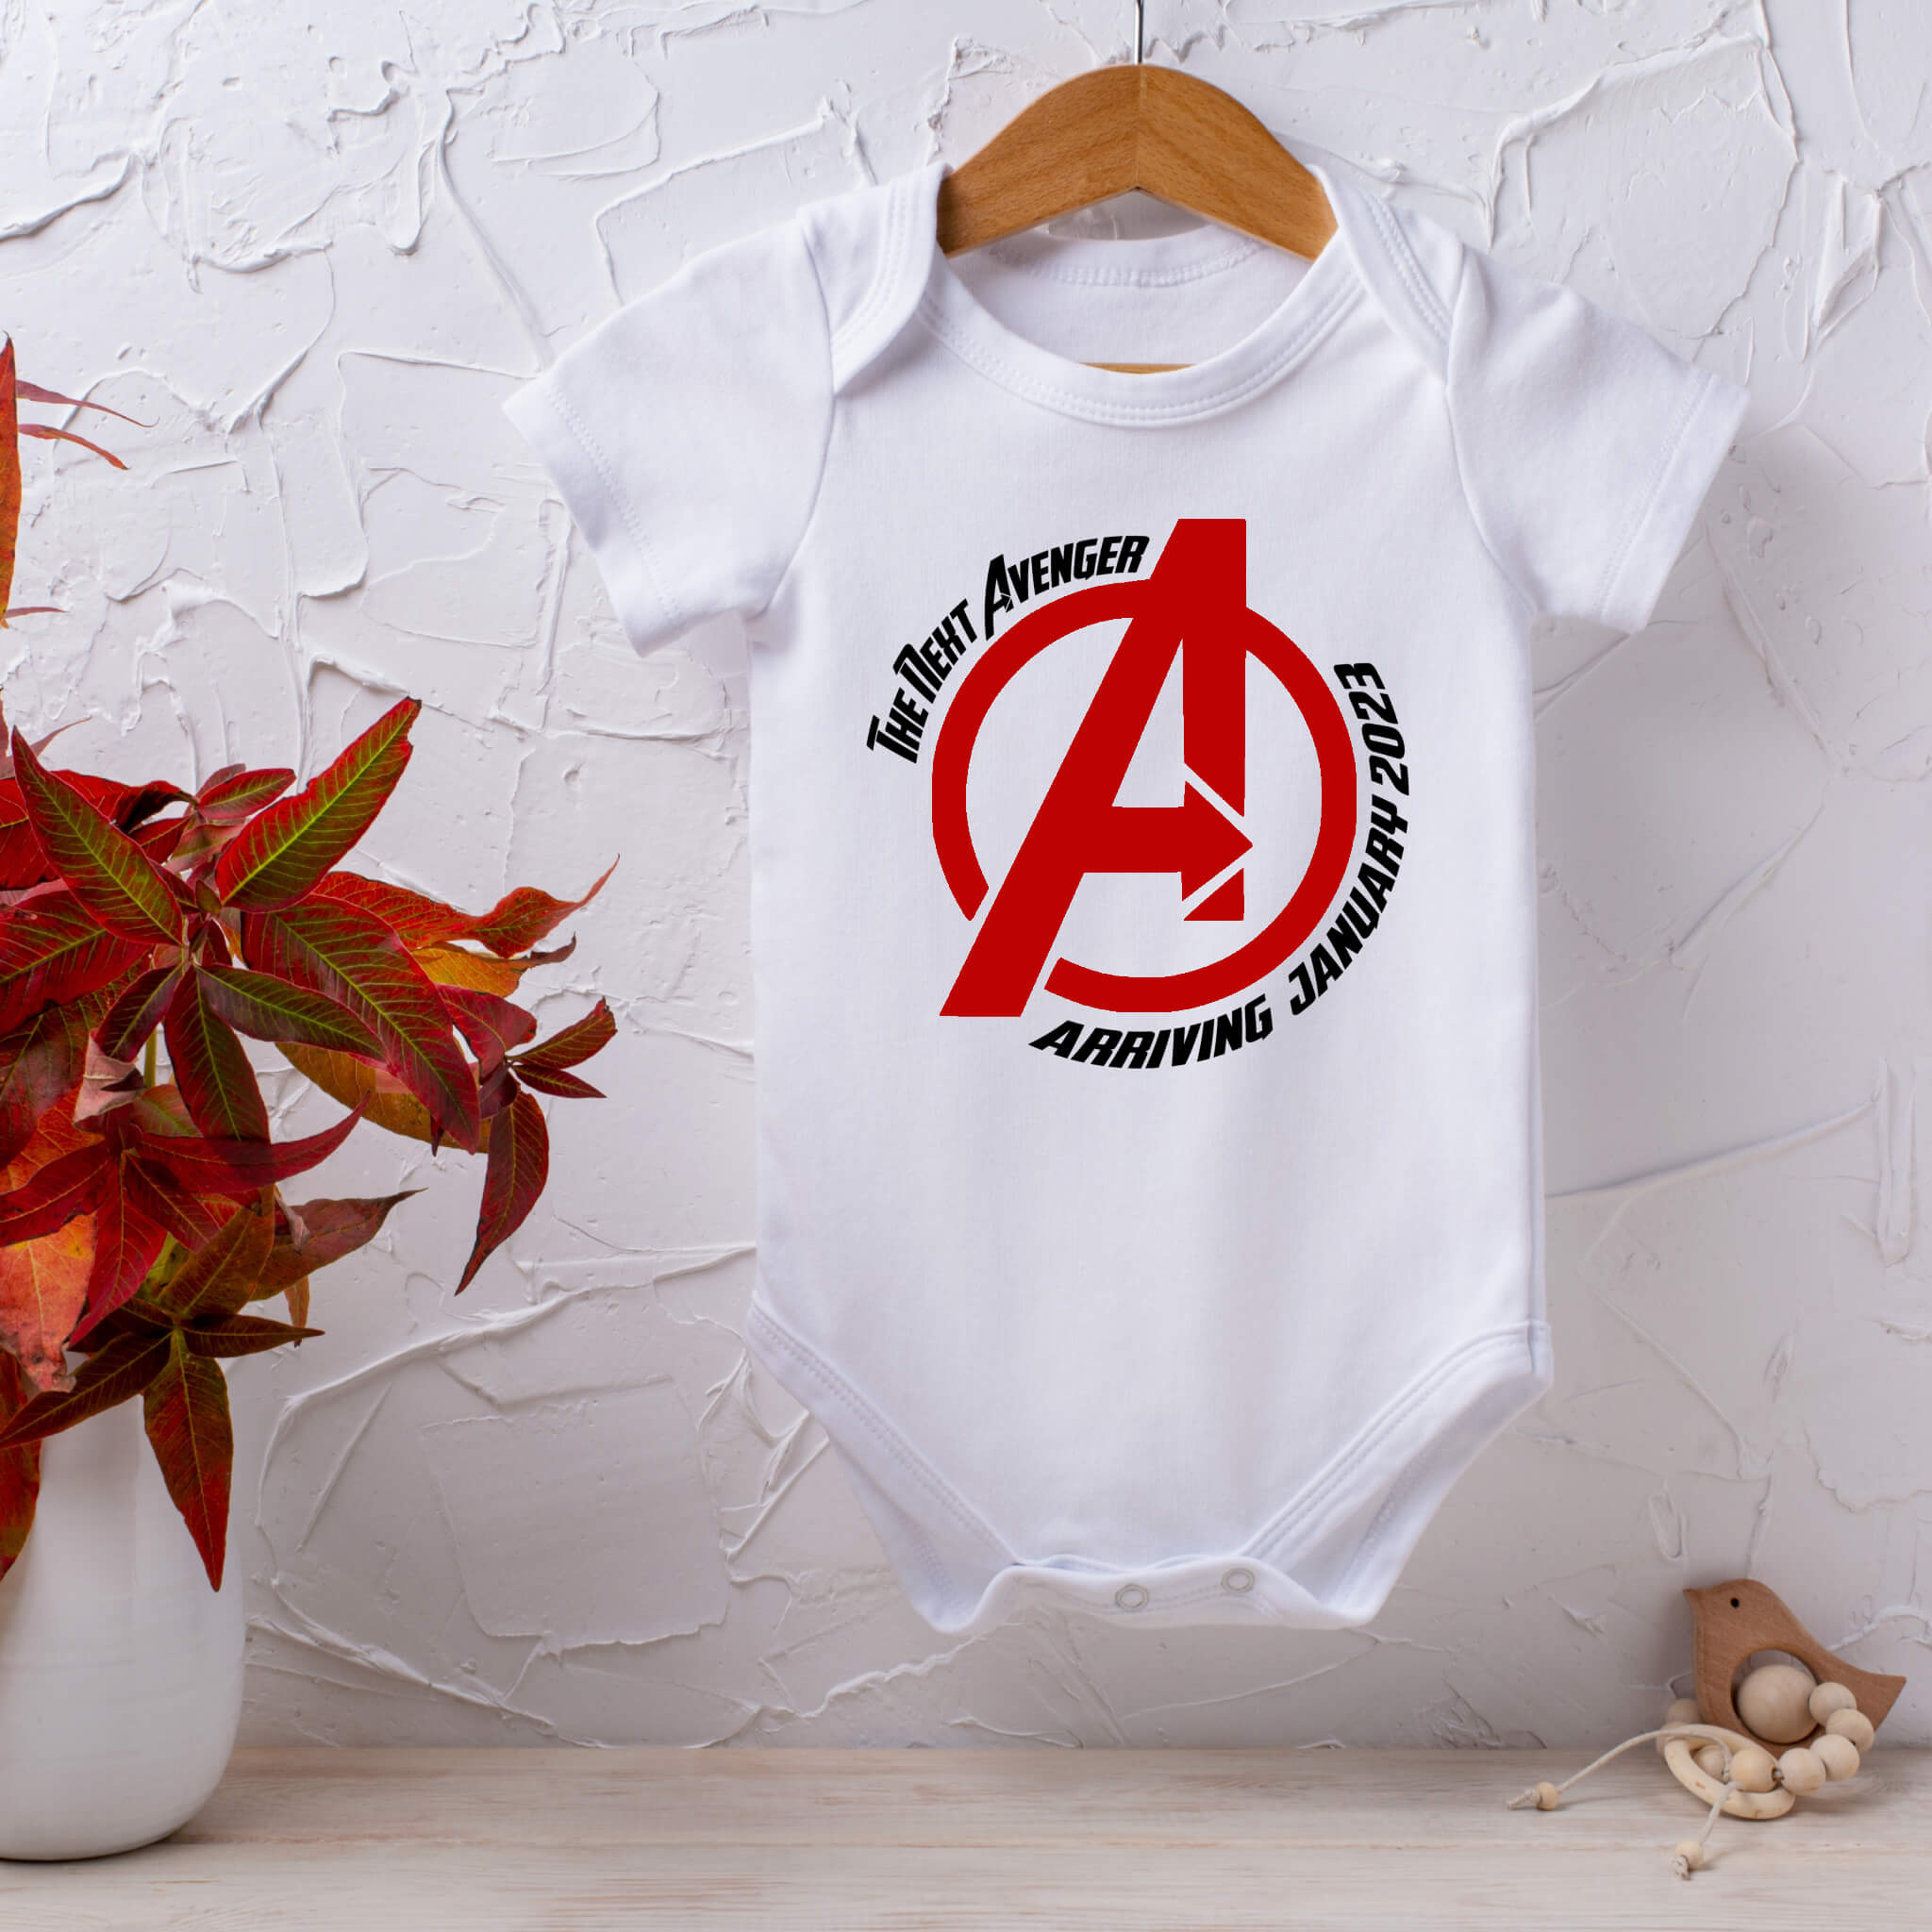 Personalized Pregnancy Announcement The Next Avenger is Coming, Superhero Avengers Themed Customizable Onesie